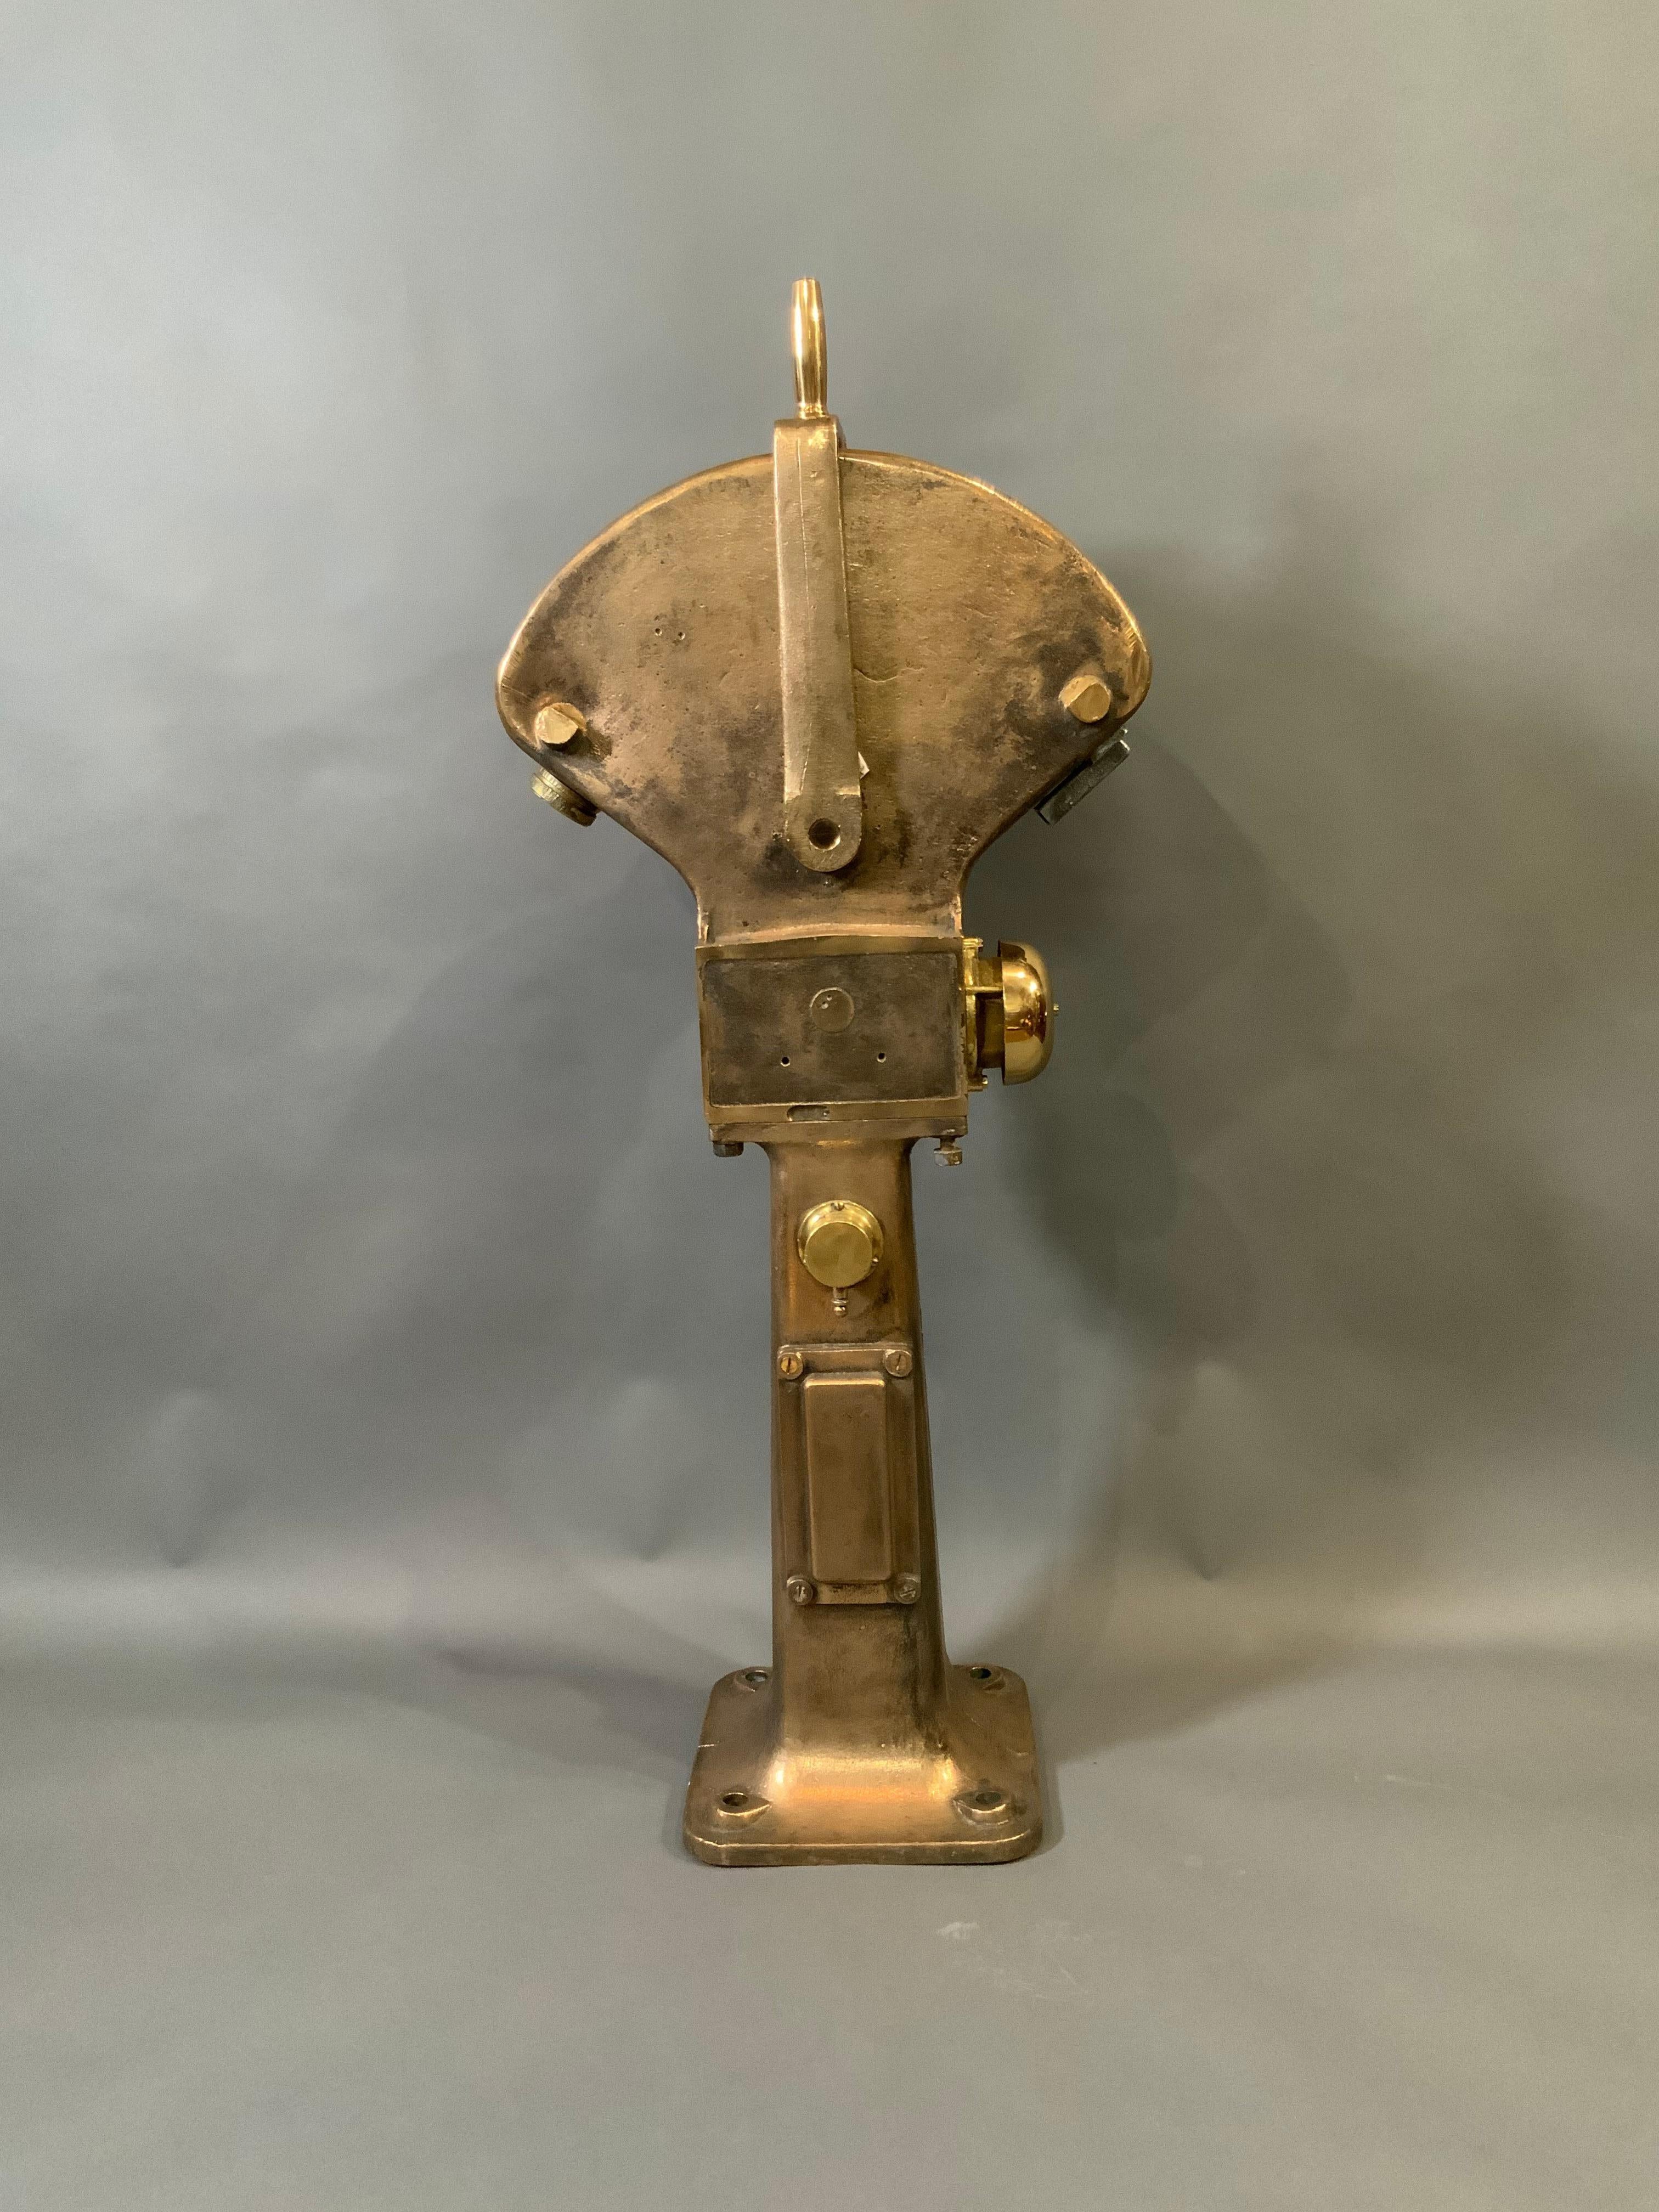 Ships course telegraph by the notable firm Siemens and Company Ltd of London. This substantial piece weighs 157 pounds. Unit is highly polished and lacquered and has commands including Hard, course, starboard, steady, etc. Dimensions are 45 tall, 21